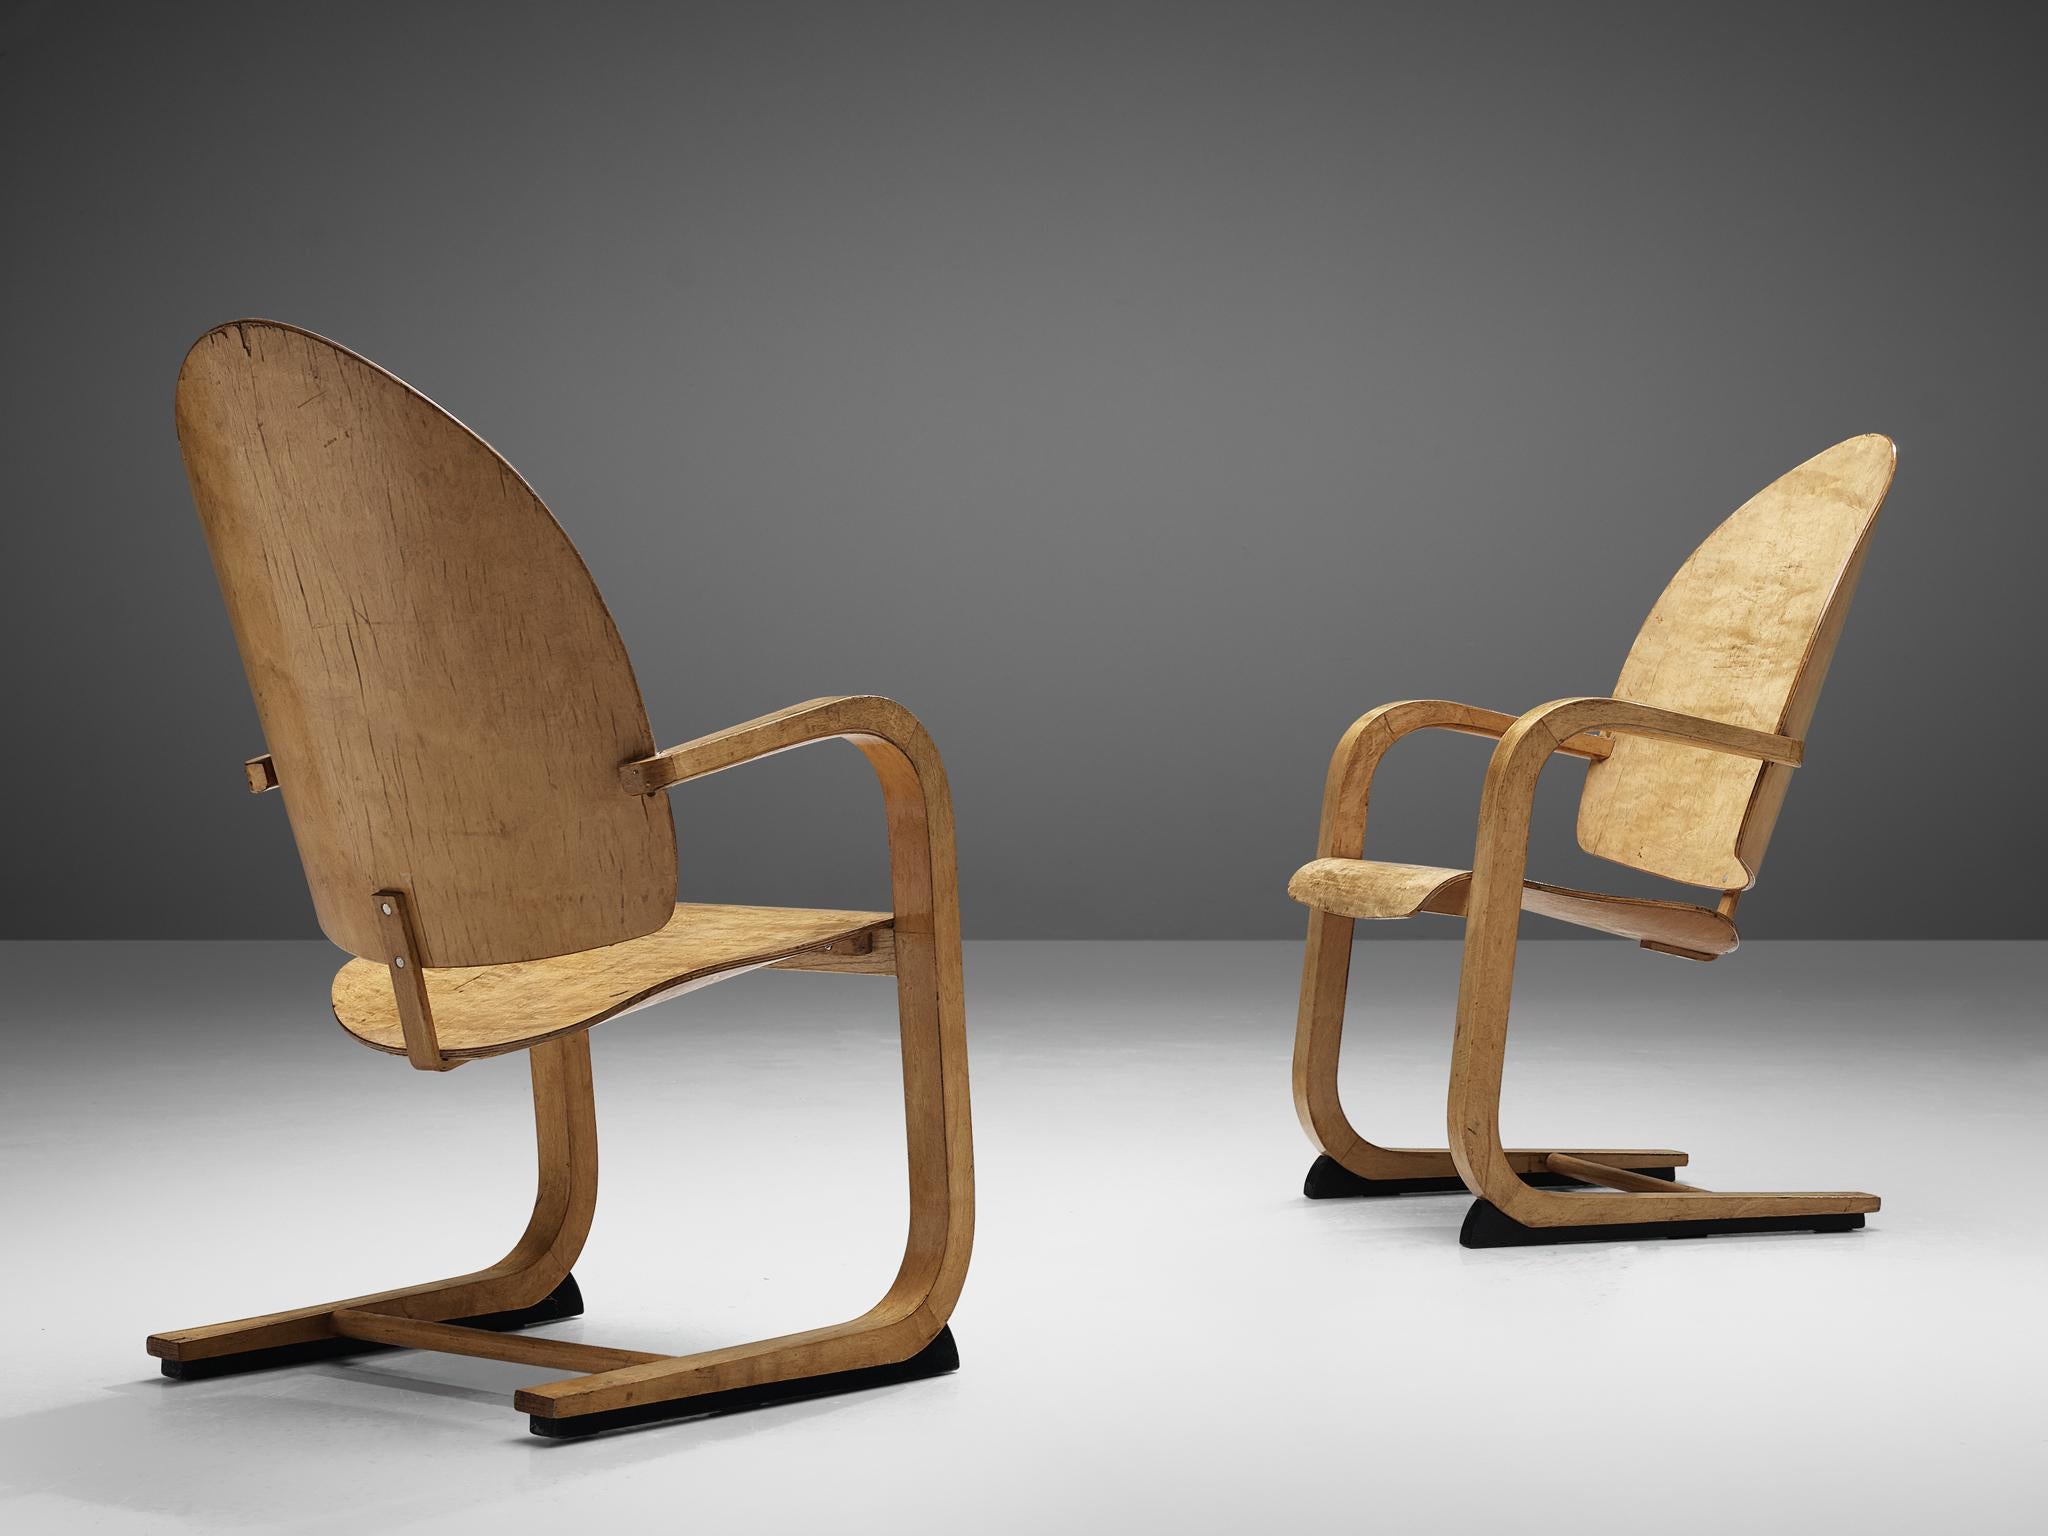 Pair of cantilever armchairs, bent plywood with birch, solid bent birch frame, black lacquered wood, Europe, 1930s

Pair of Modernist cantilever chairs in birch veneer bentwood that is reminisent of the innovative early 1930s designs of Marcel